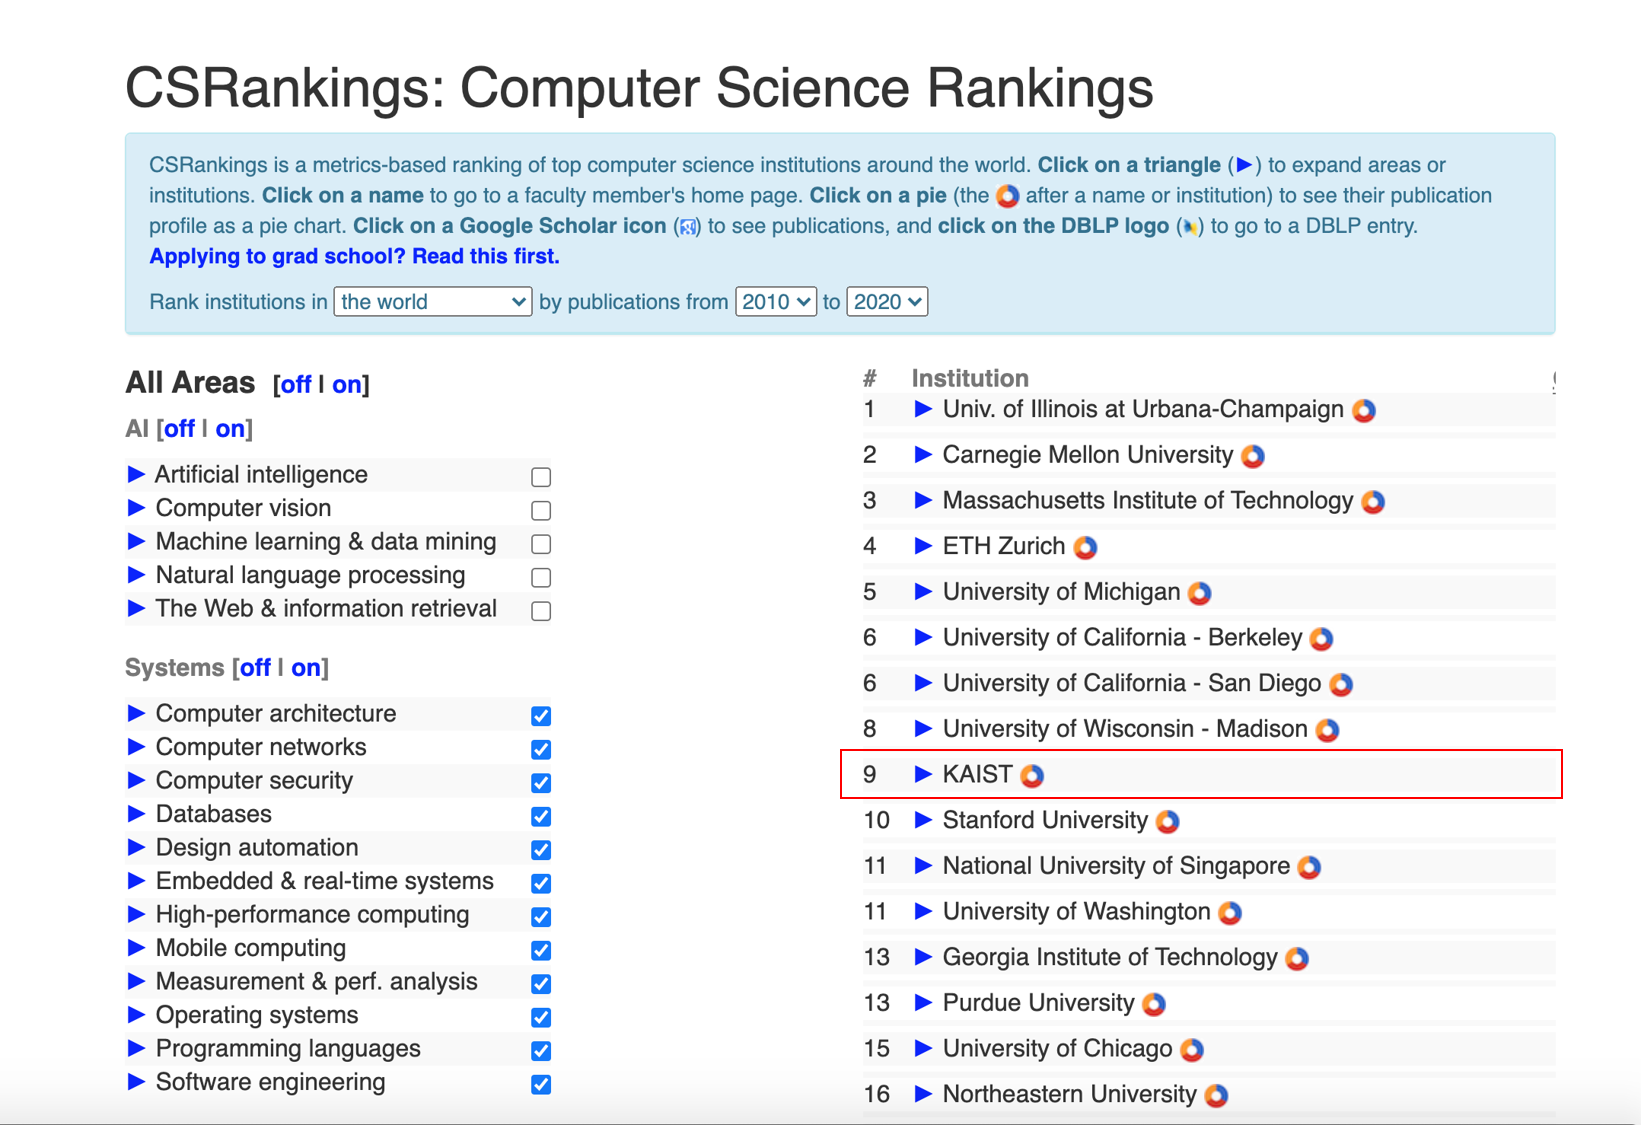 KAIST Ranks 9th for Computer Systems in CS Rankings